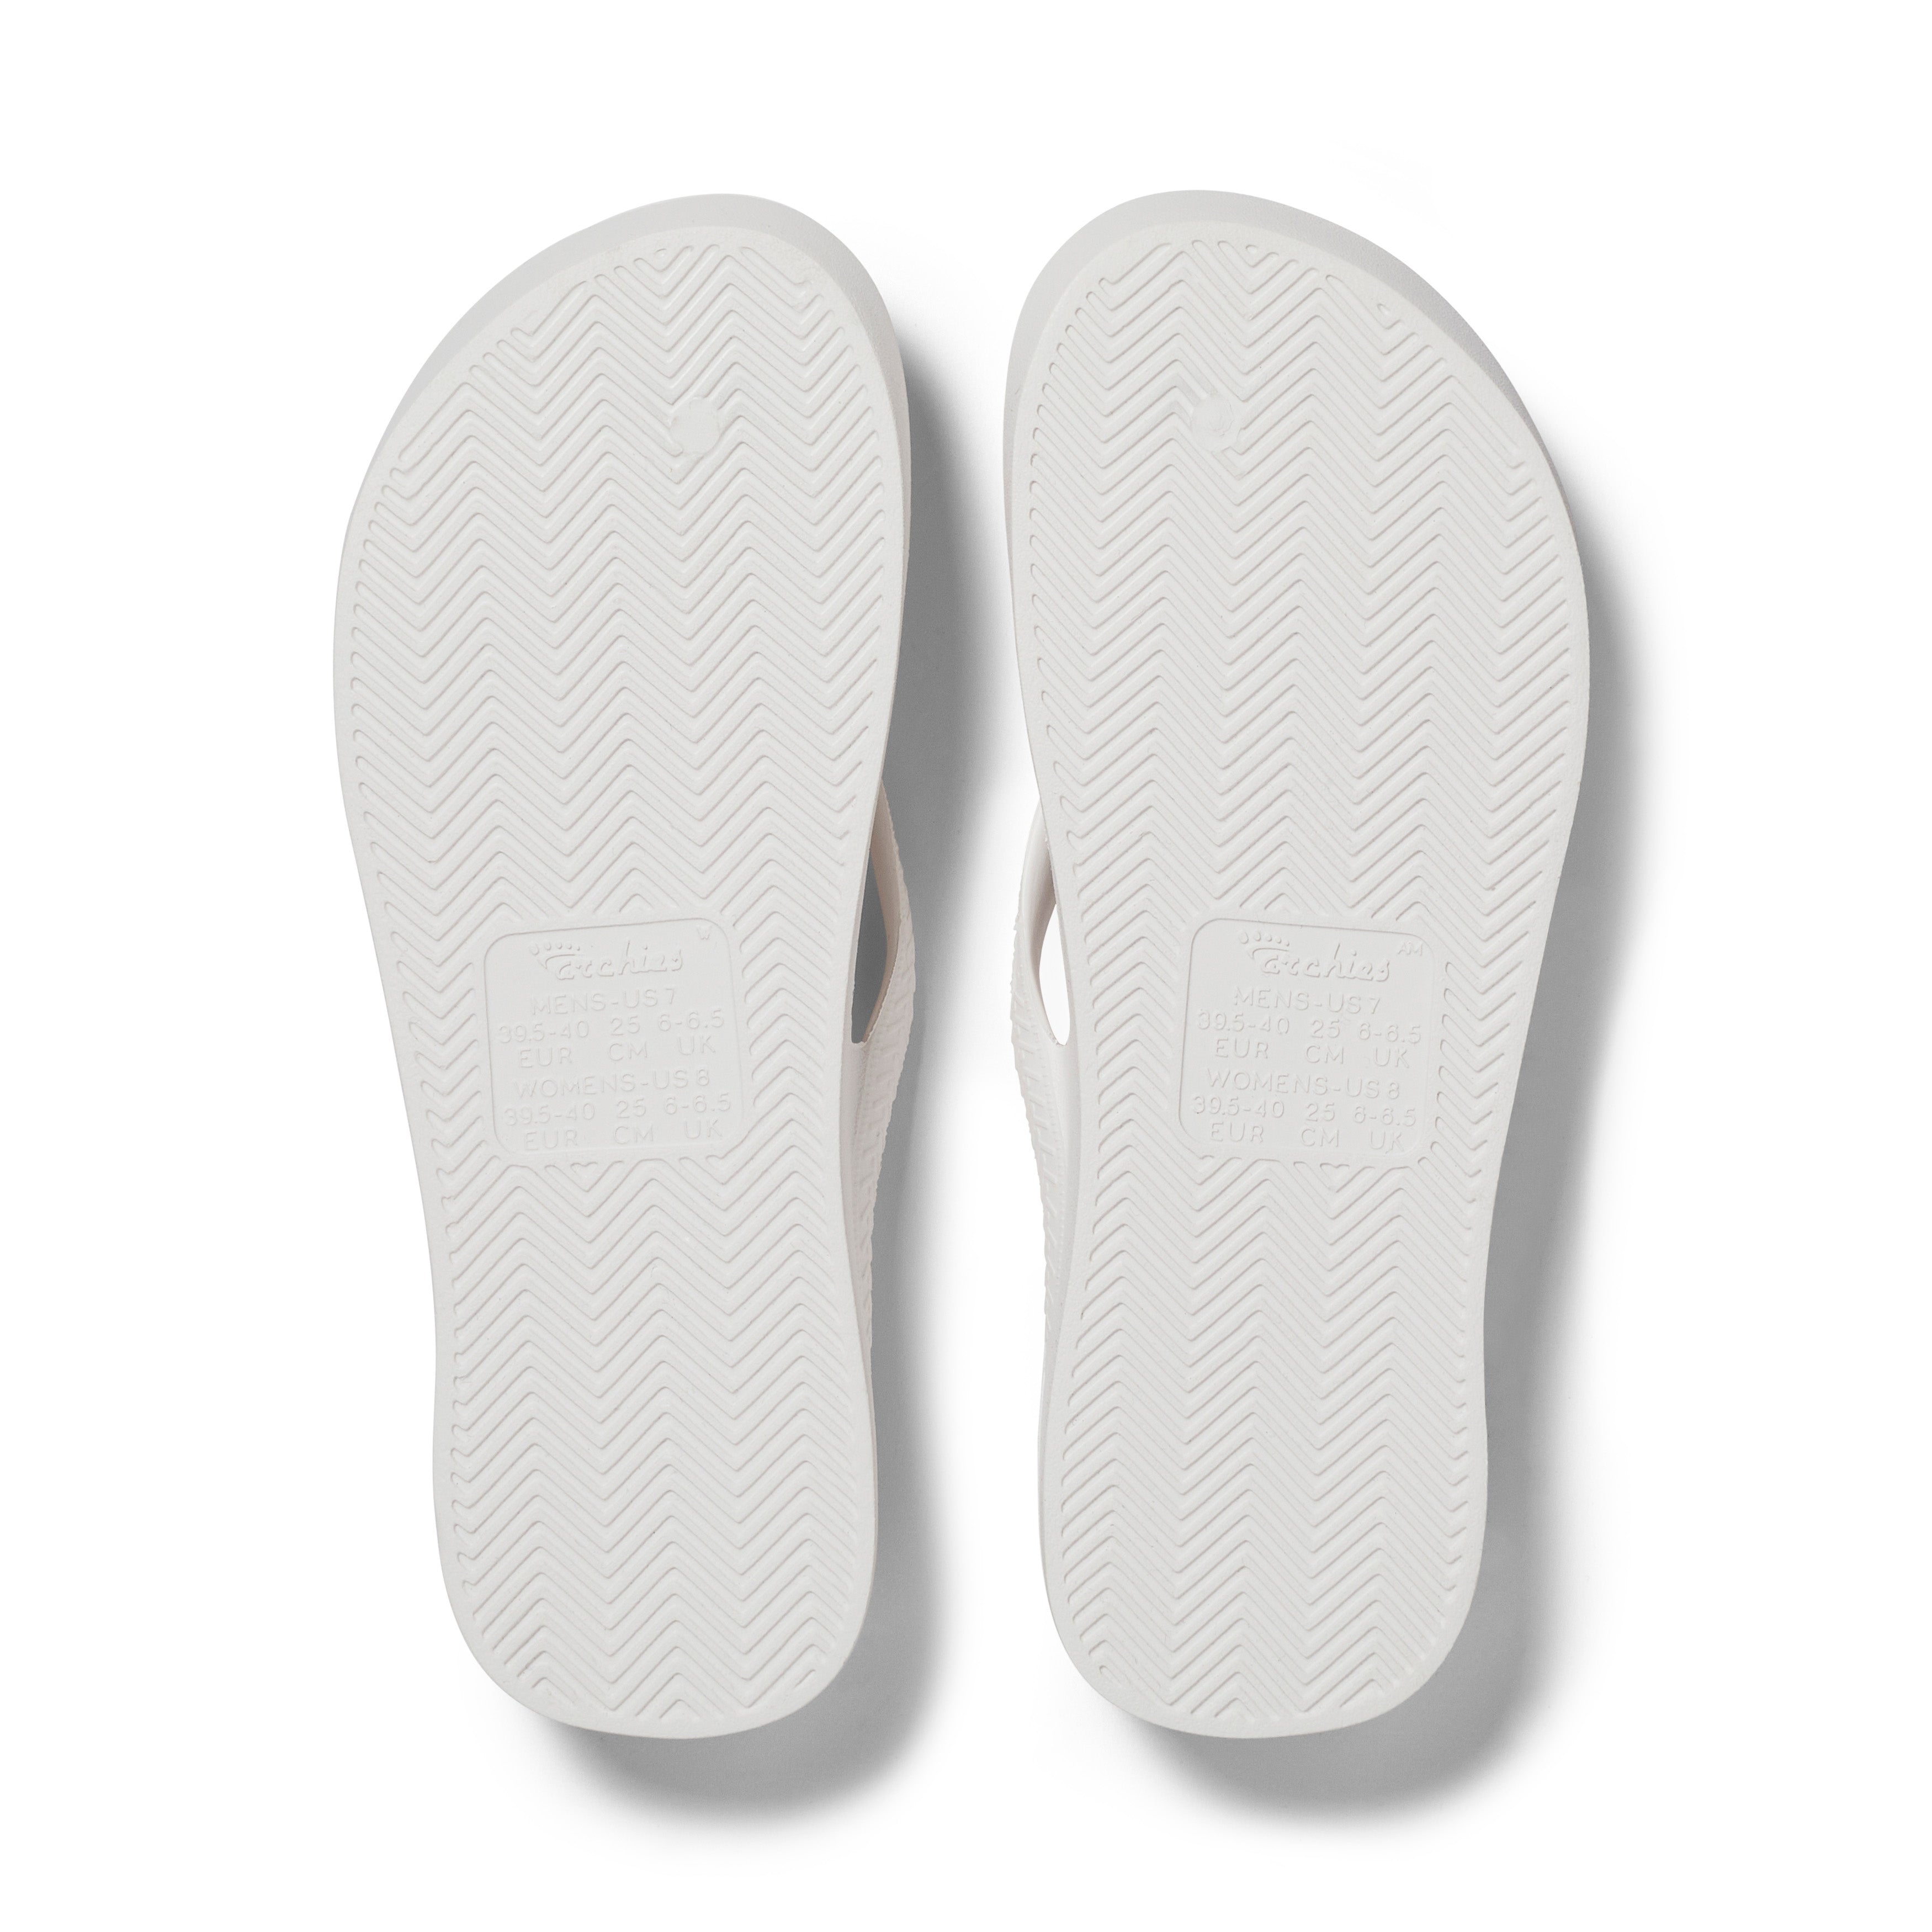 Archies Arch Support Flip Flops in White – Tenni Moc's Shoe Store